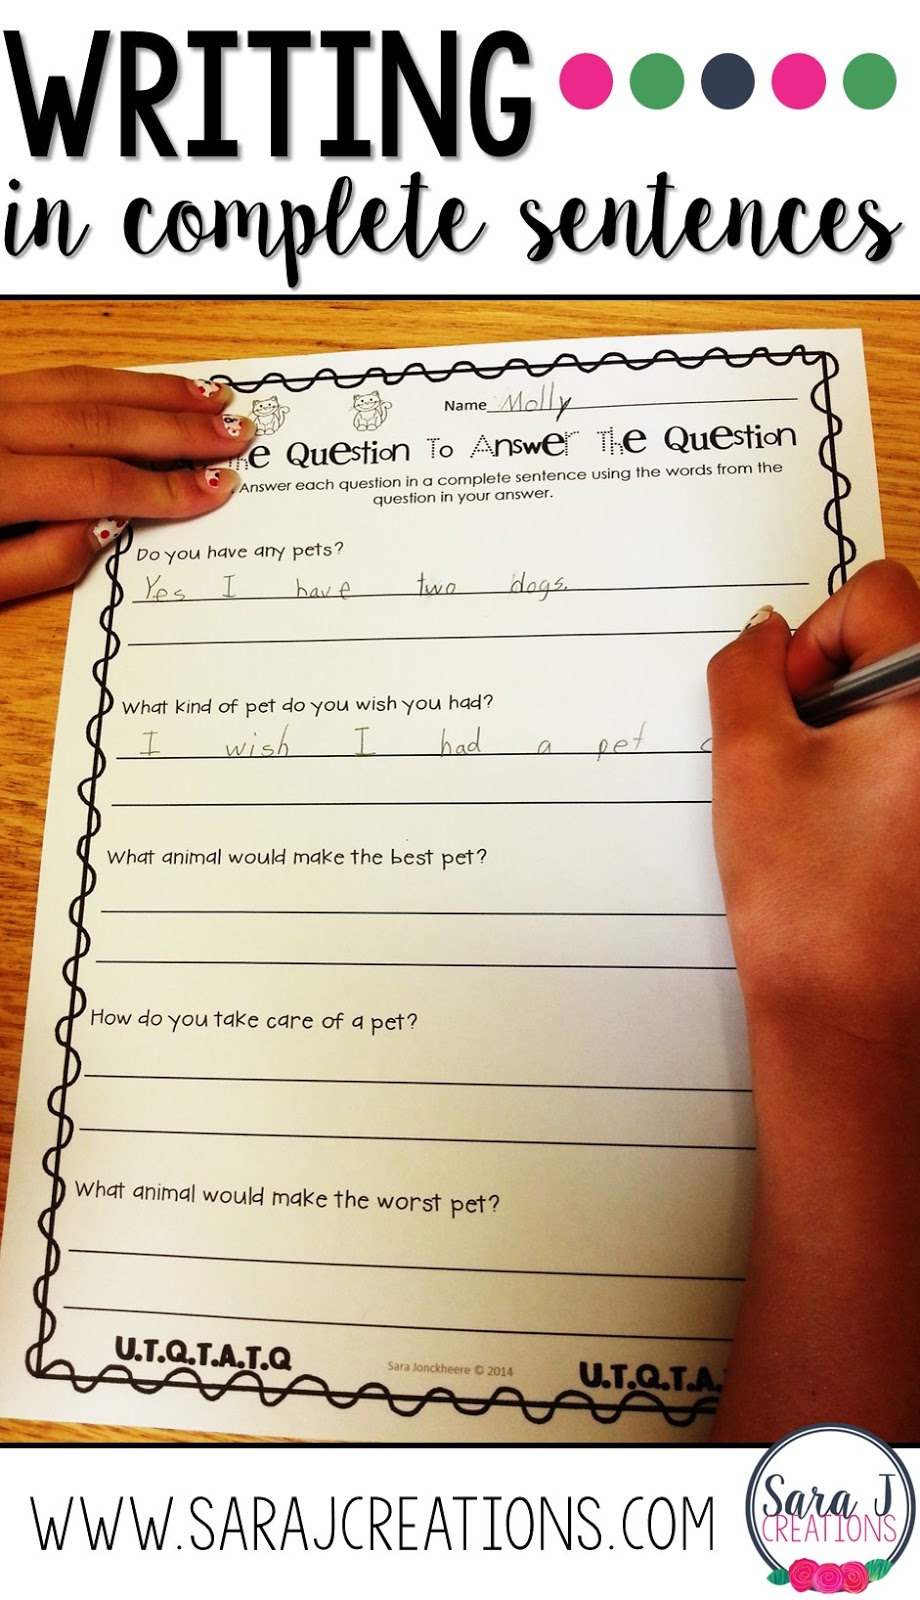 Ideas for writing and answering questions in complete sentences!  Quick easy practice!